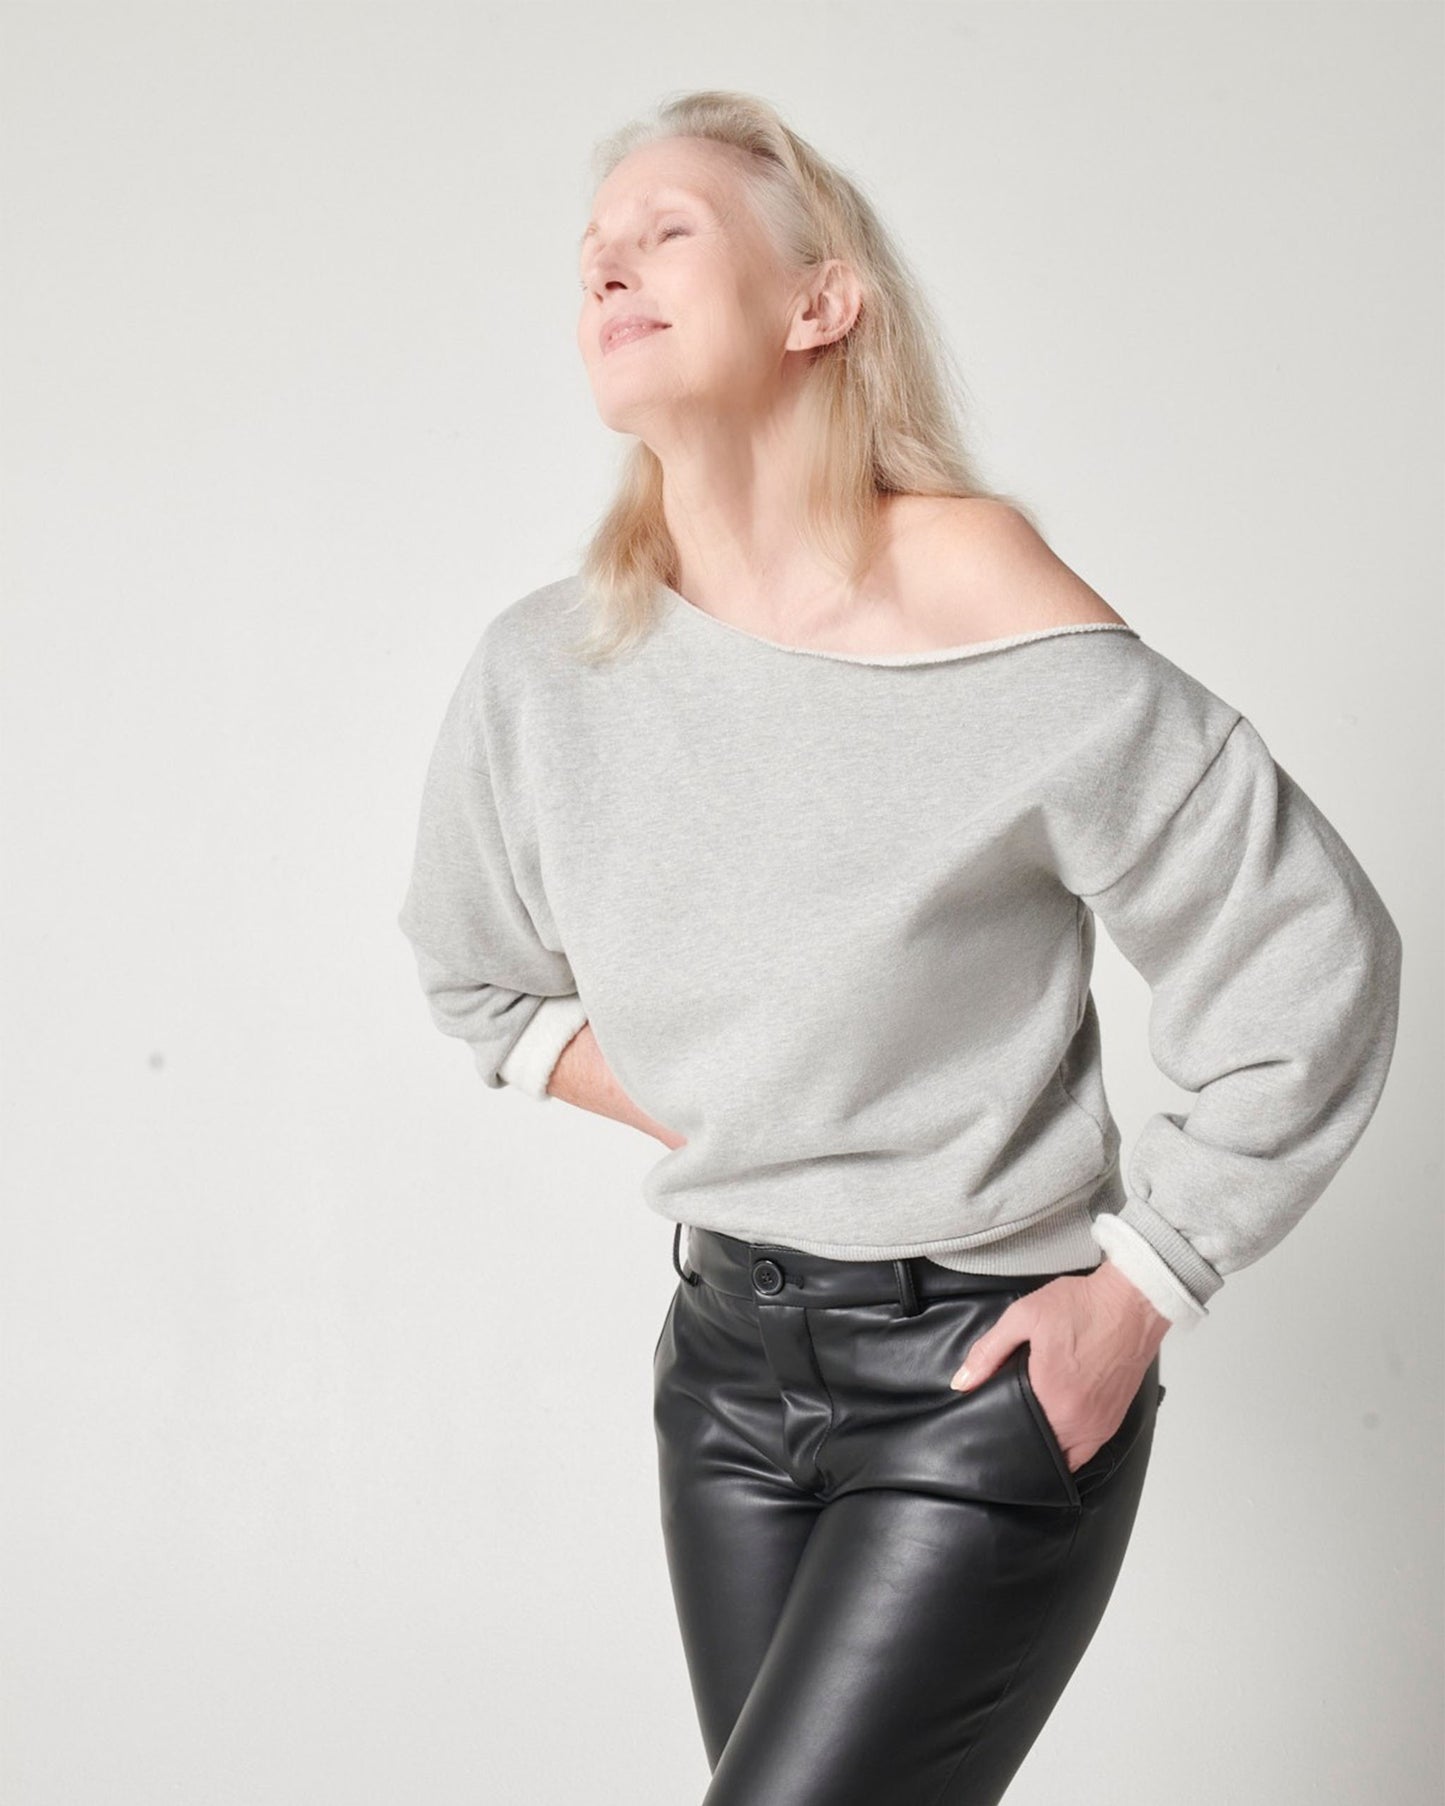 Heather grey cotton fleece off-the-shoulder sweatshirt on older model in black leather pants while looking up